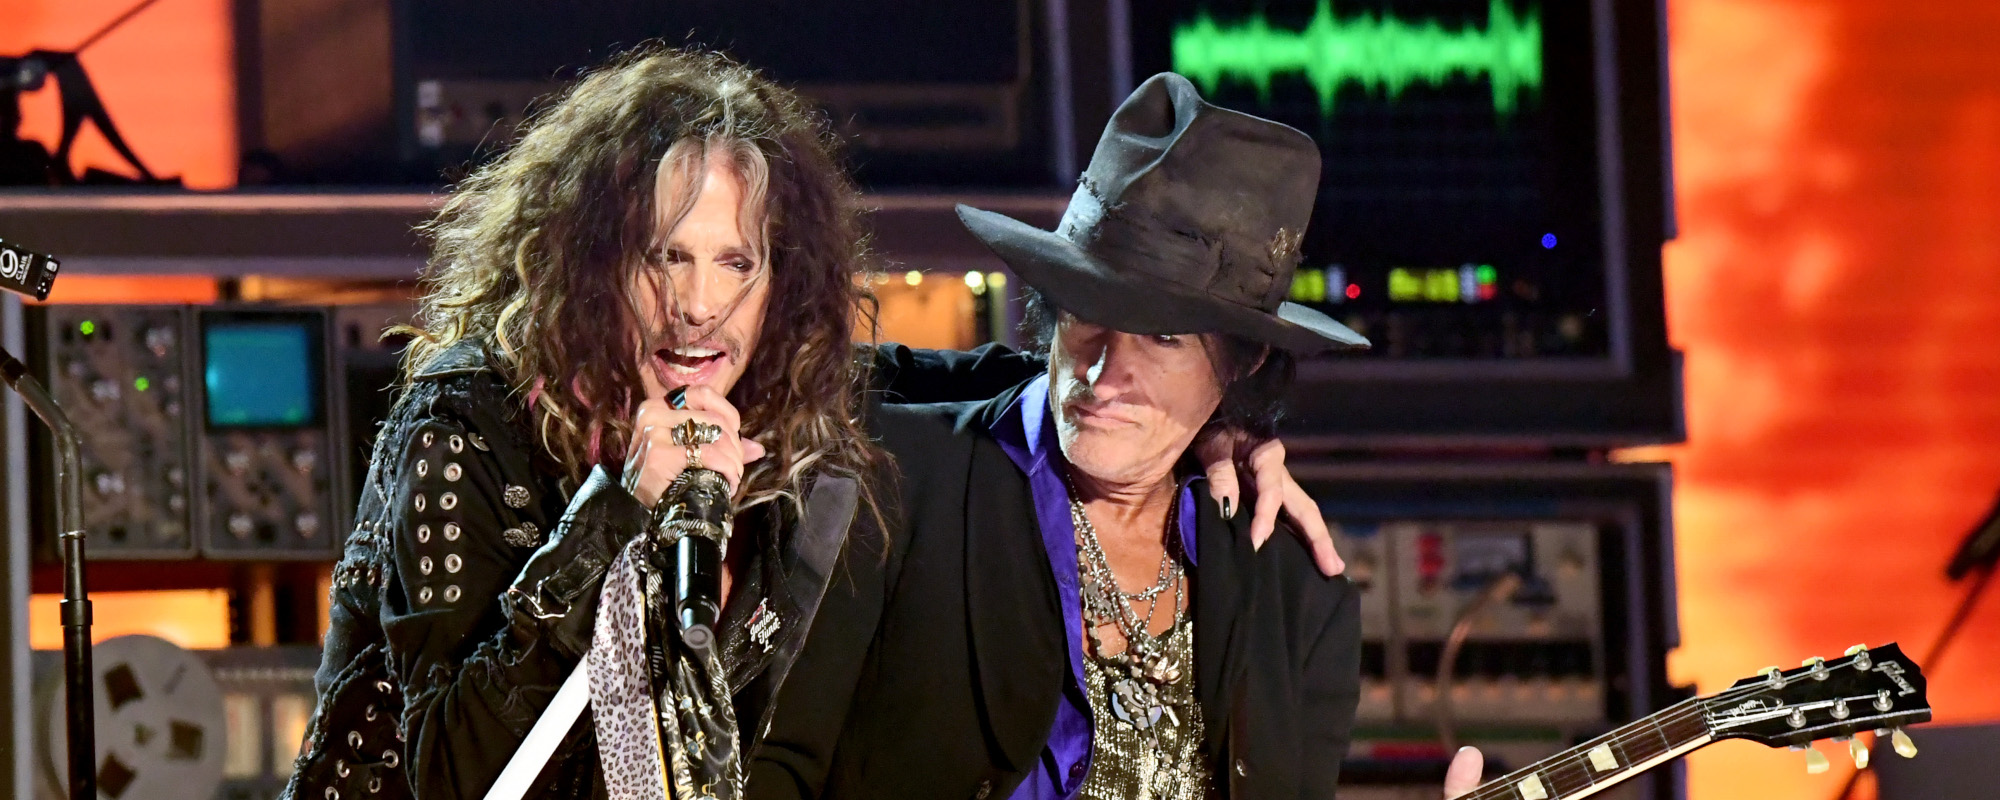 3 of the Best Aerosmith Songs Used In Films